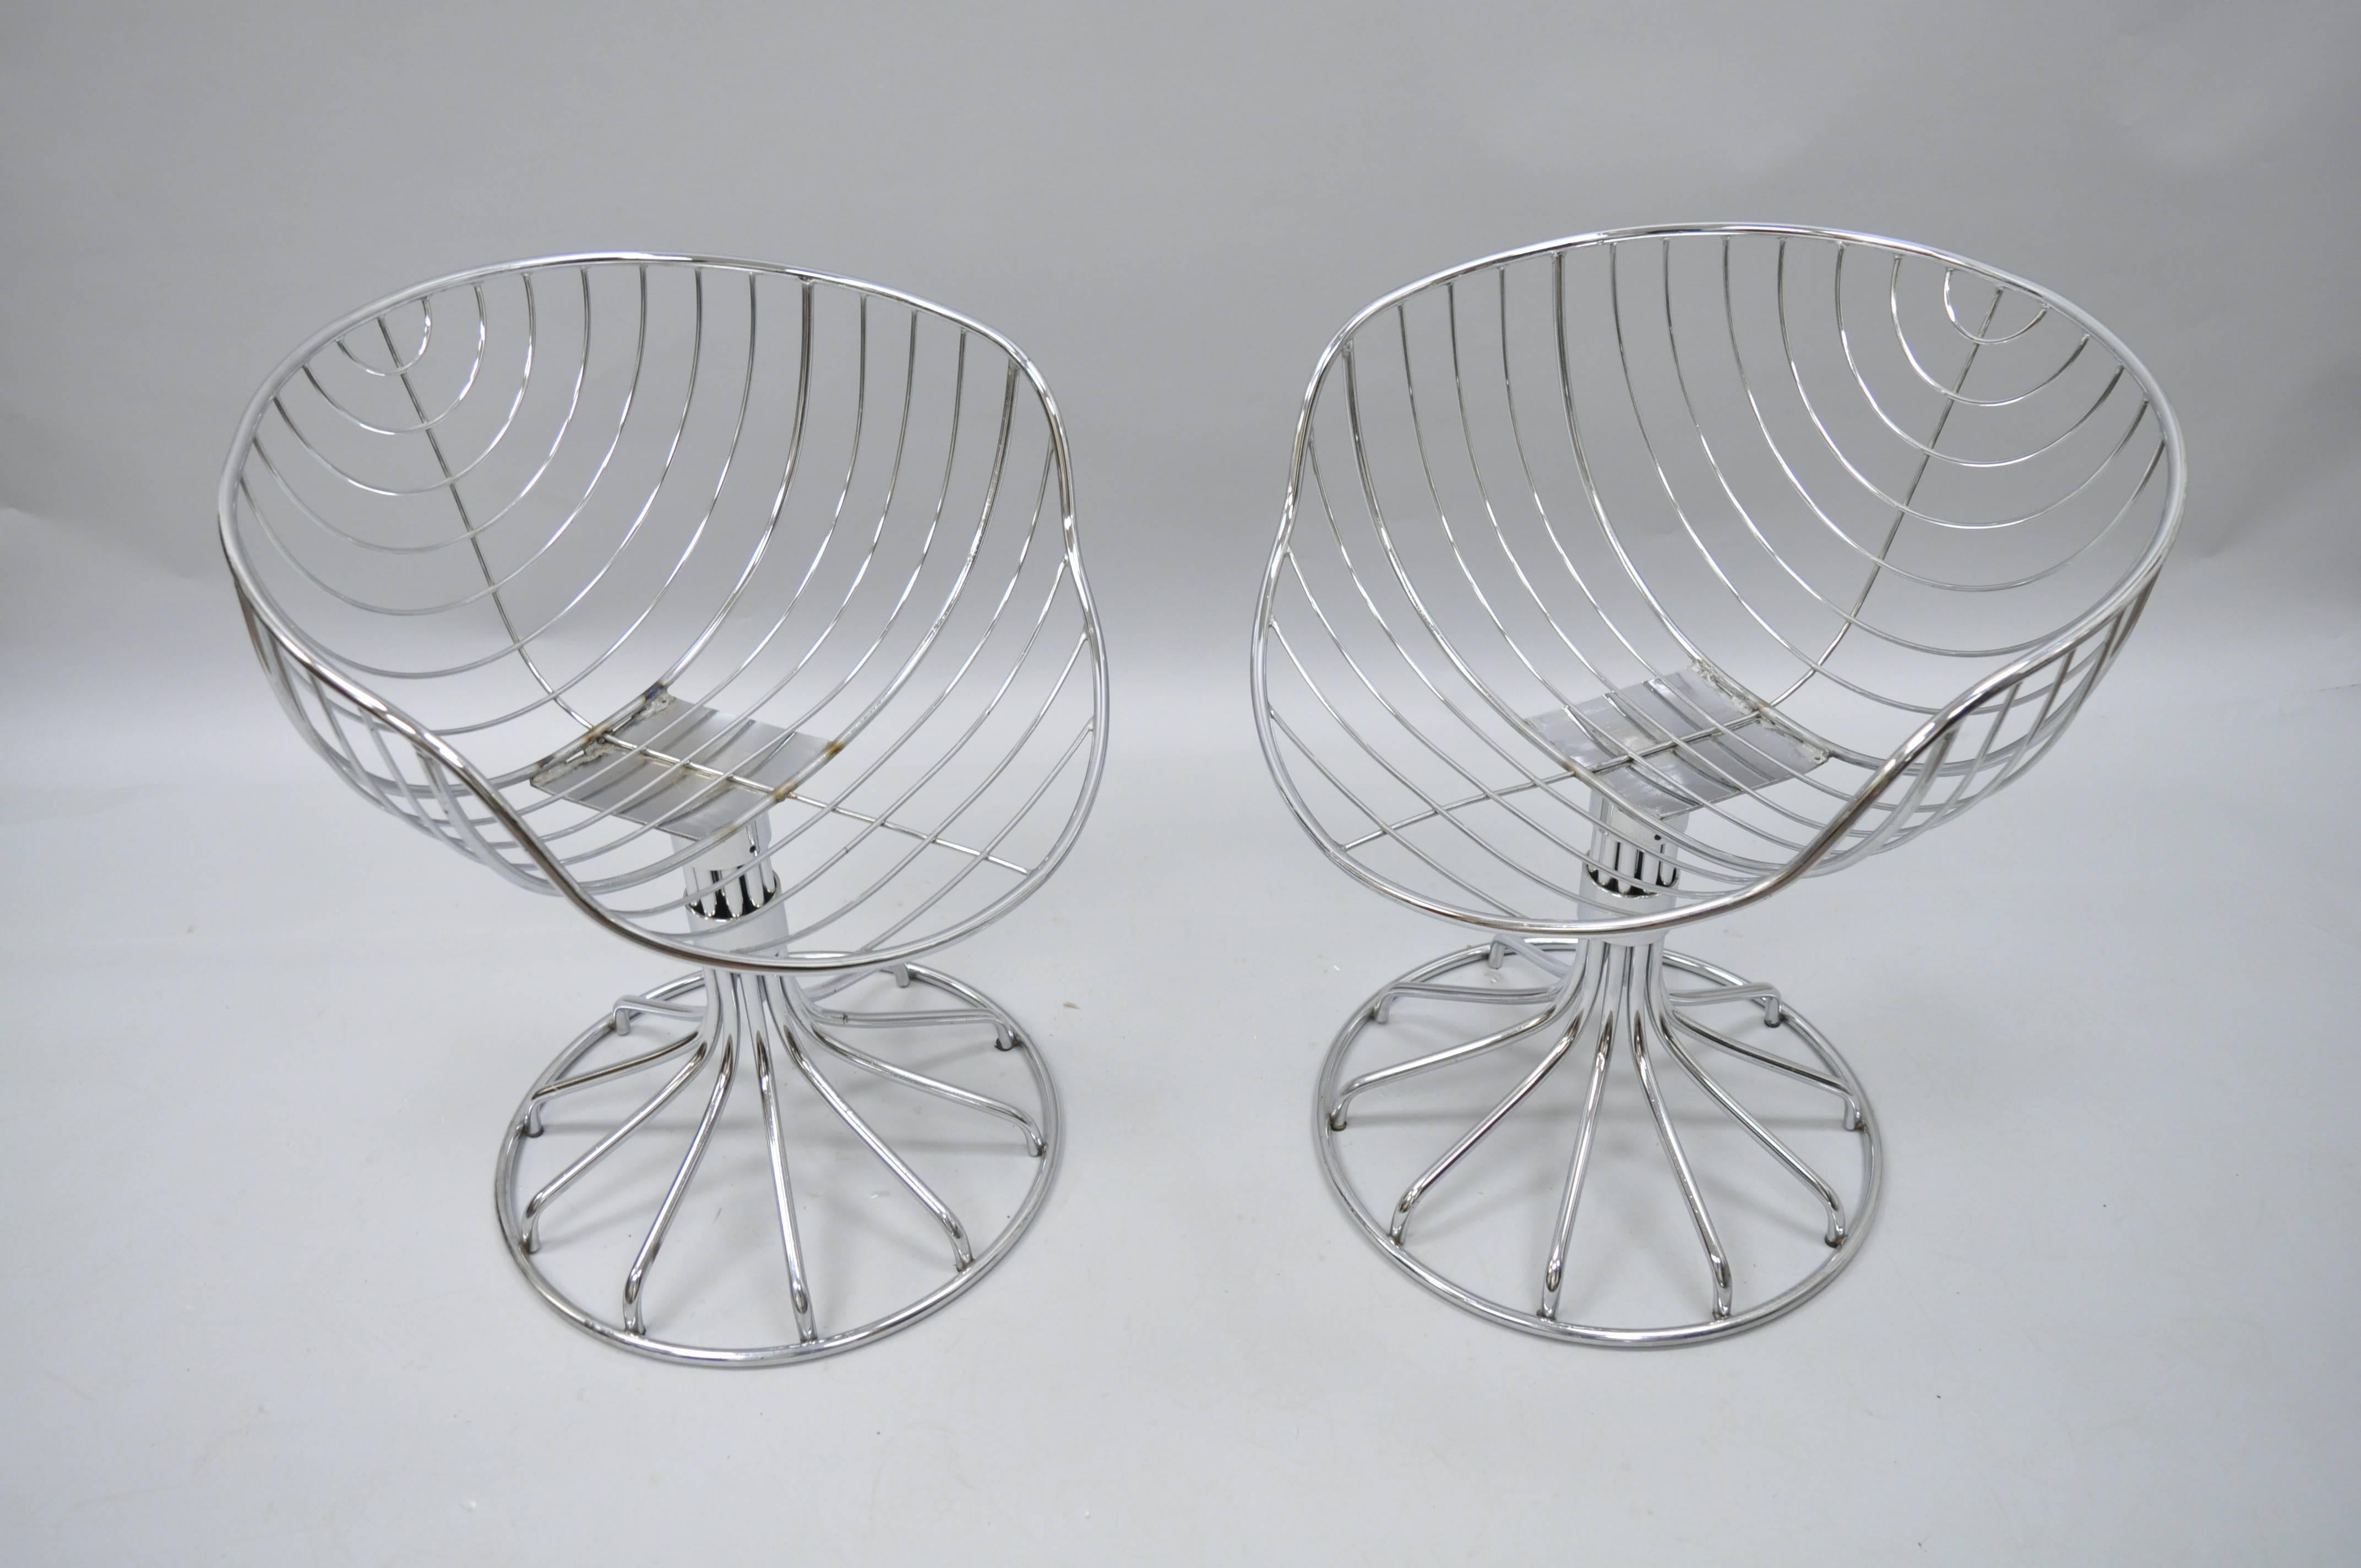 Pair of vintage Italian Mid-Century Modern chrome wire frame swivel chairs attributed to Gastone Rinaldi for Rima. Chairs feature swivel pedestal bases, sleek sculptural form, and original brown suede cushions (which show wear). Measurements 28